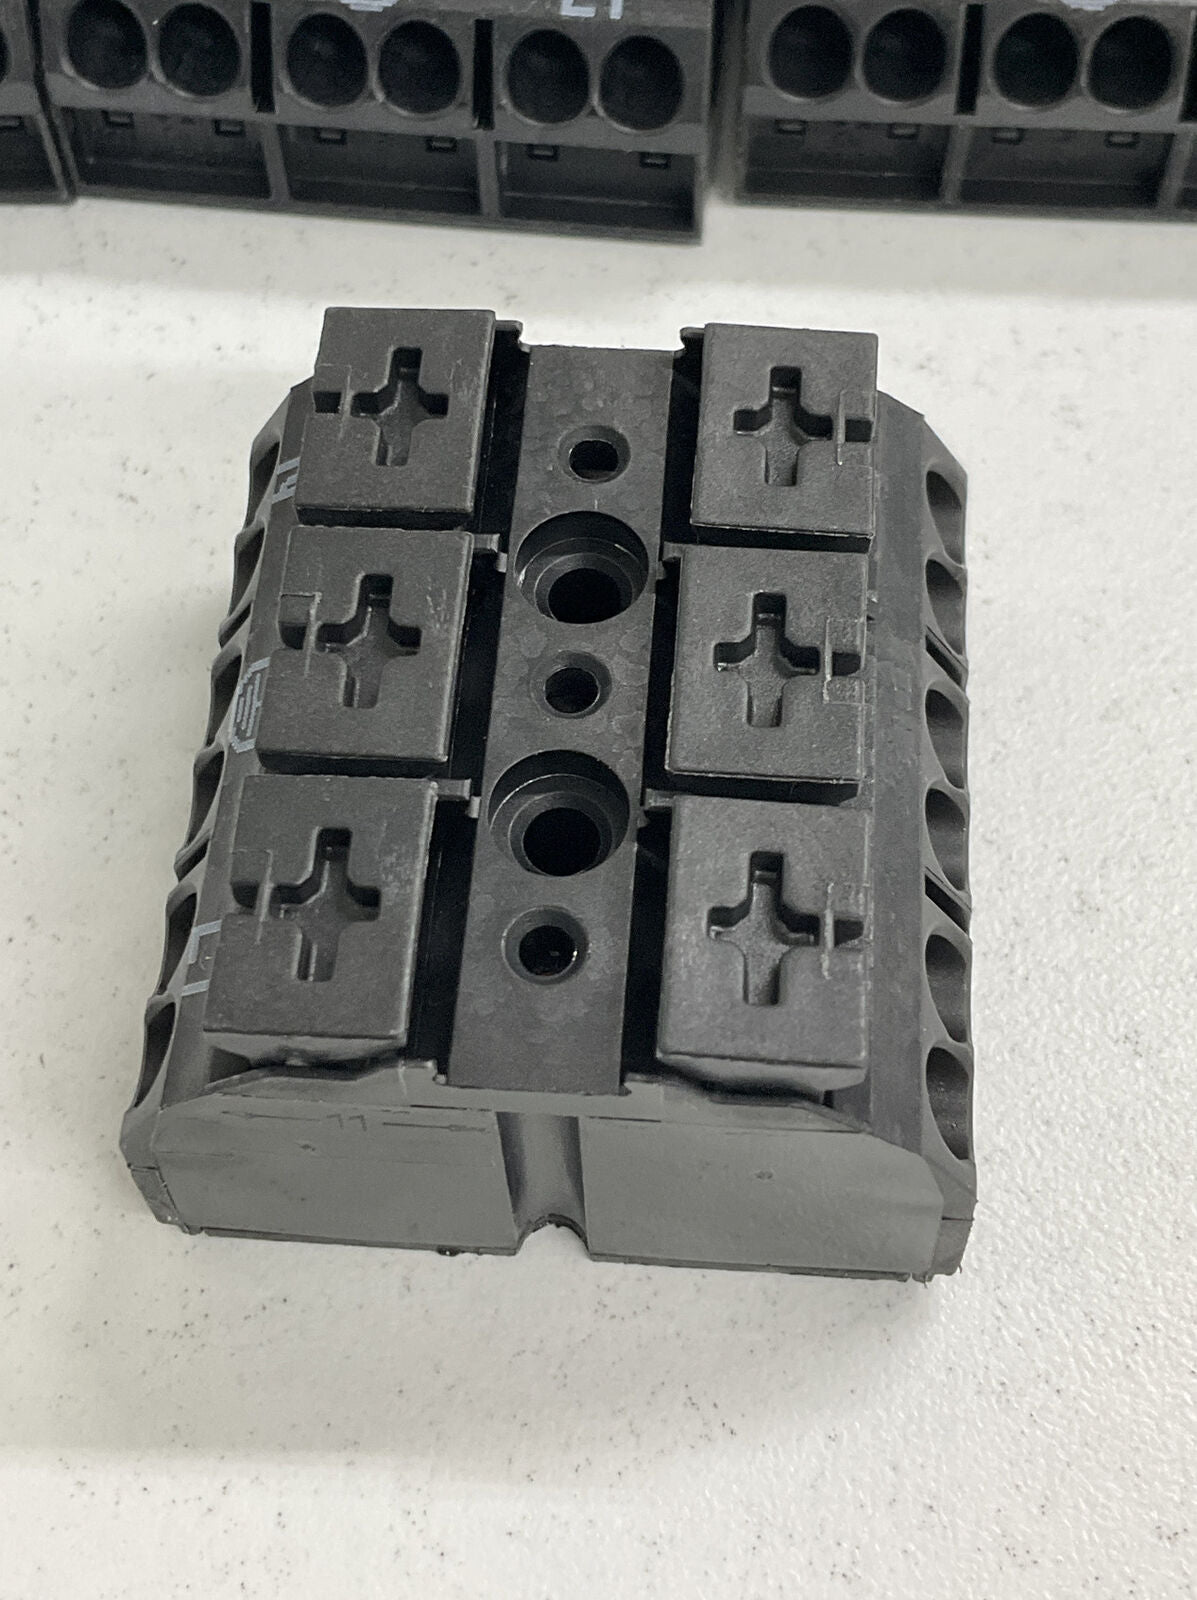 Wago 862-2503  4 Pole Chassis Mount Terminal Block Awg 20-12 250 Pieces (BK124)